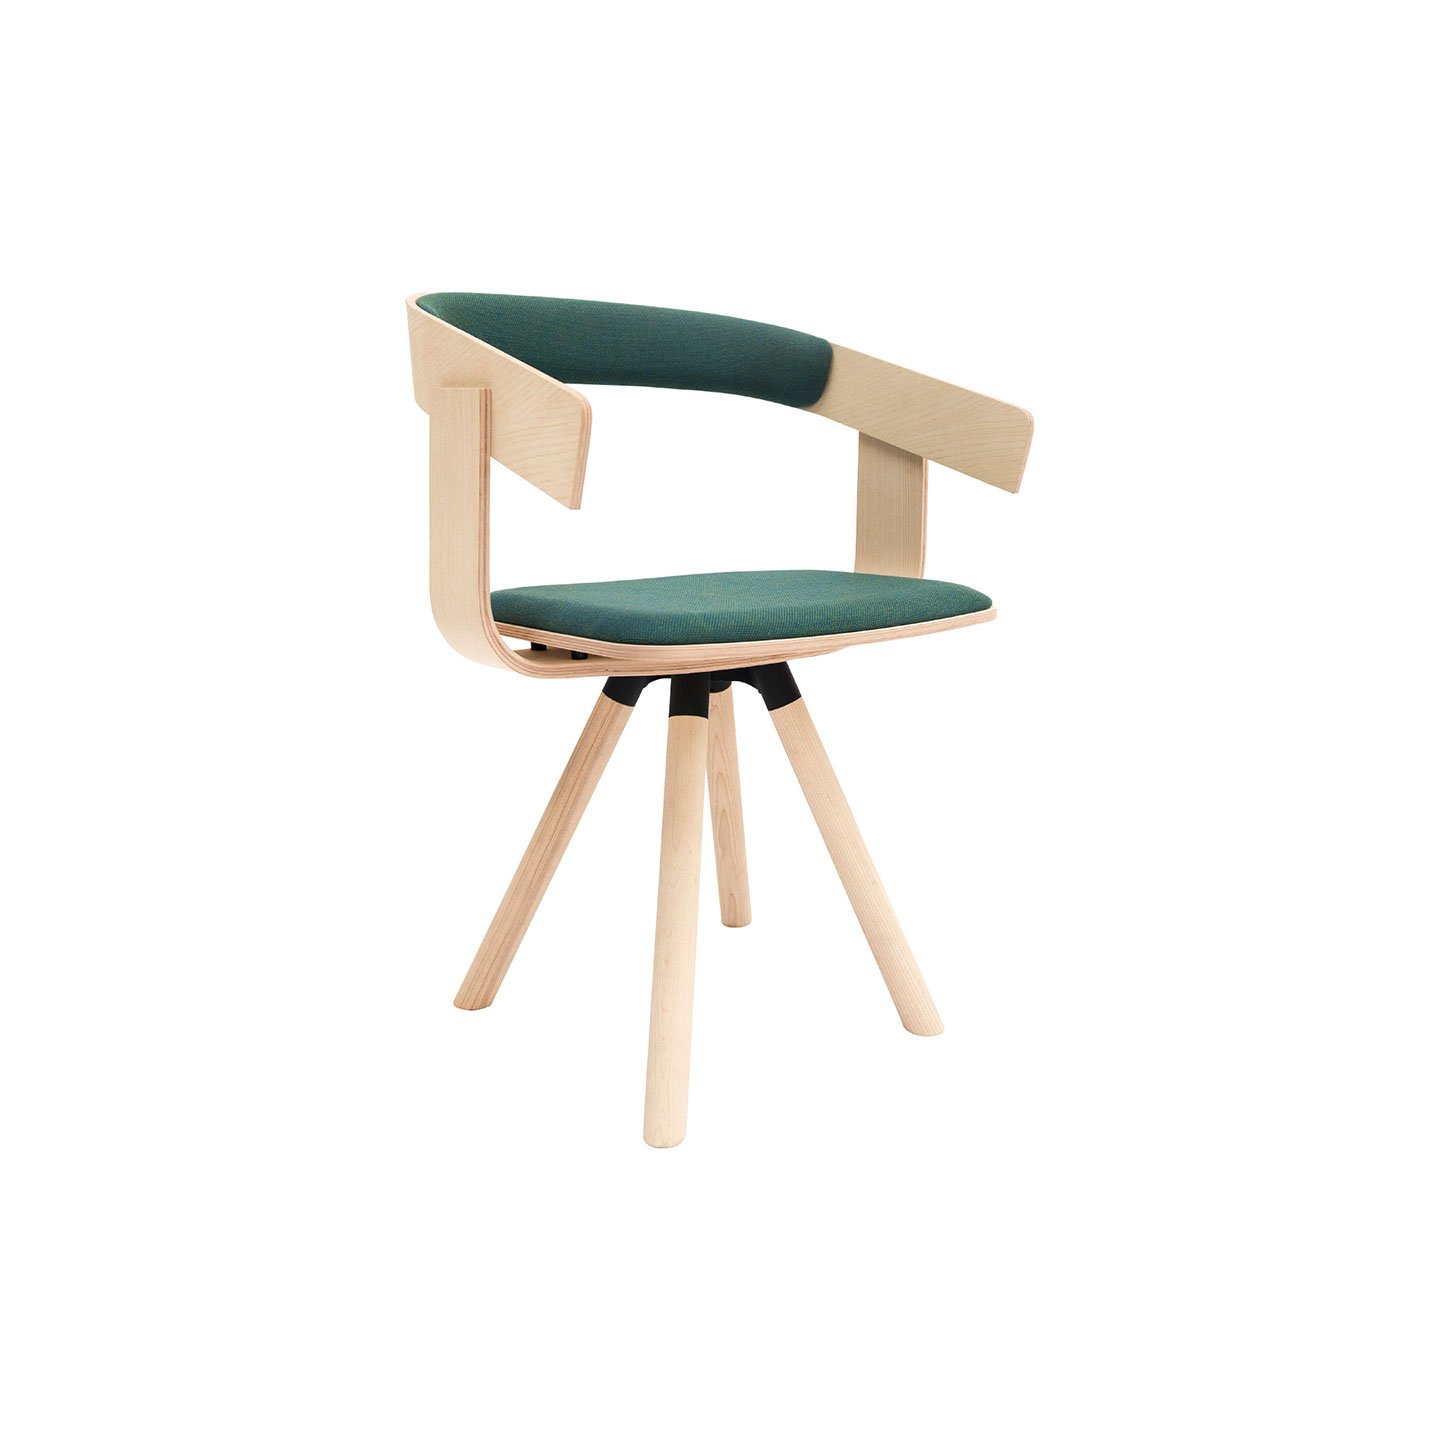 Haworth Buzzifloat chair with green seating and wooden body